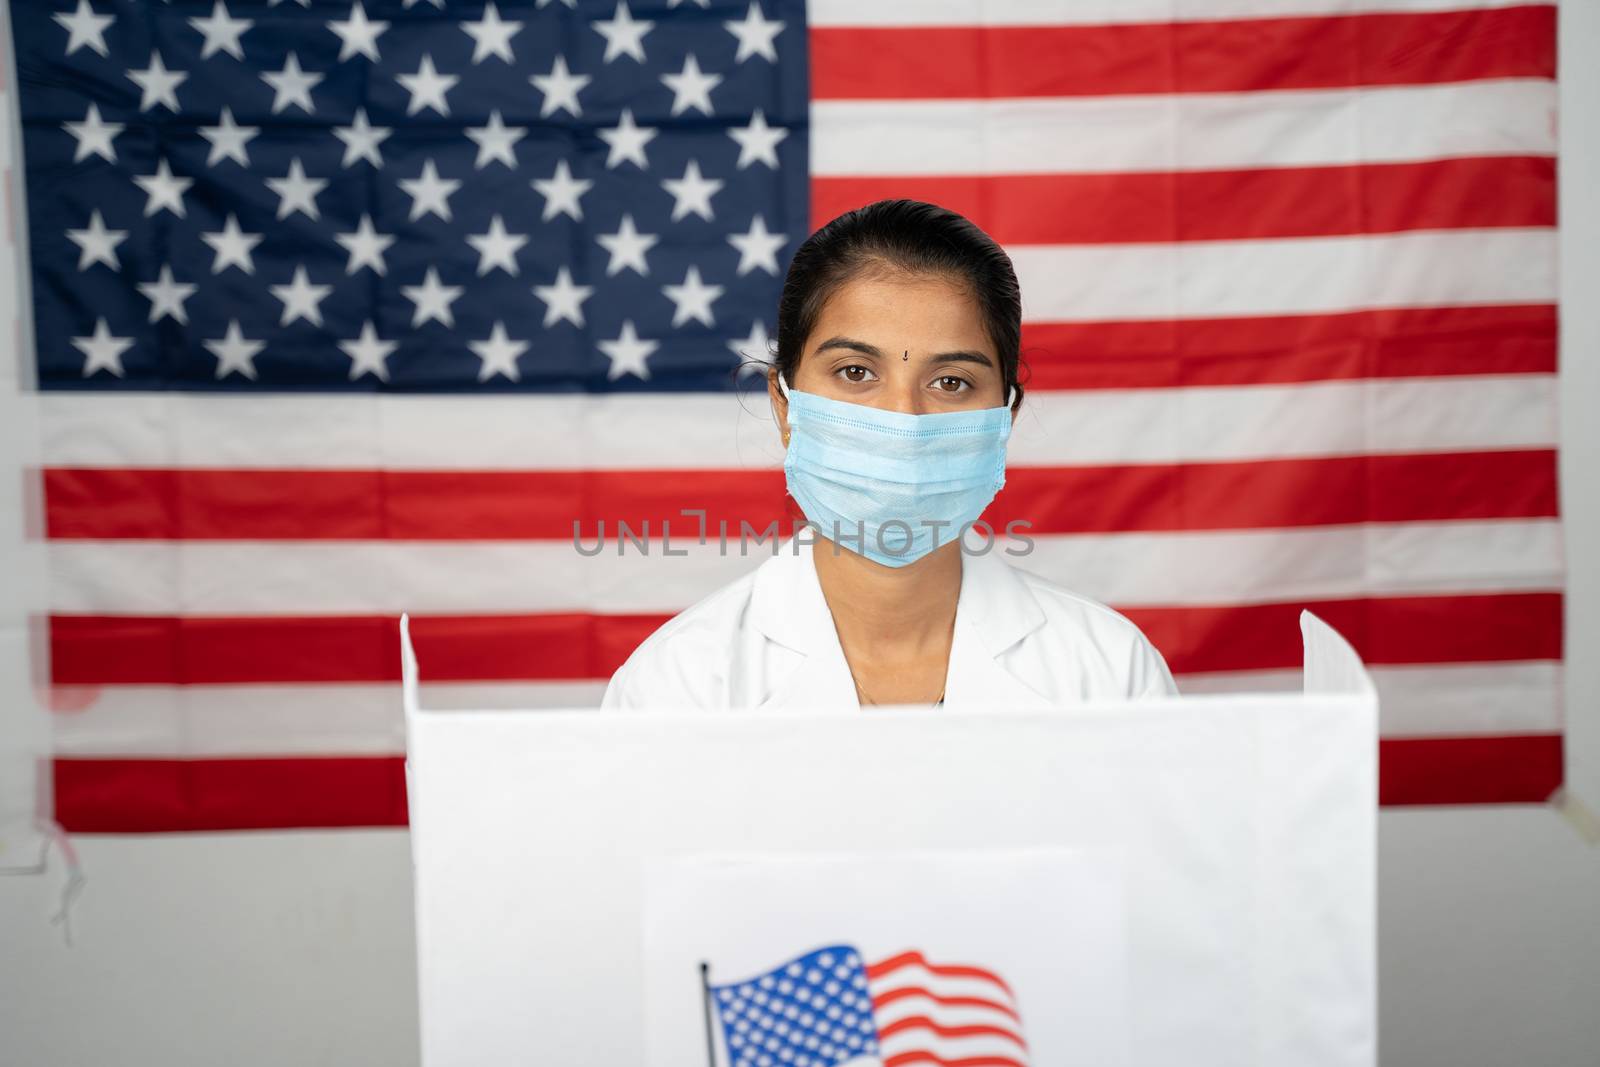 Doctor or nurse coming to polling booth with medical mask wearing for voting - concept of US election, in person voting showing with US flag as background. by lakshmiprasad.maski@gmai.com